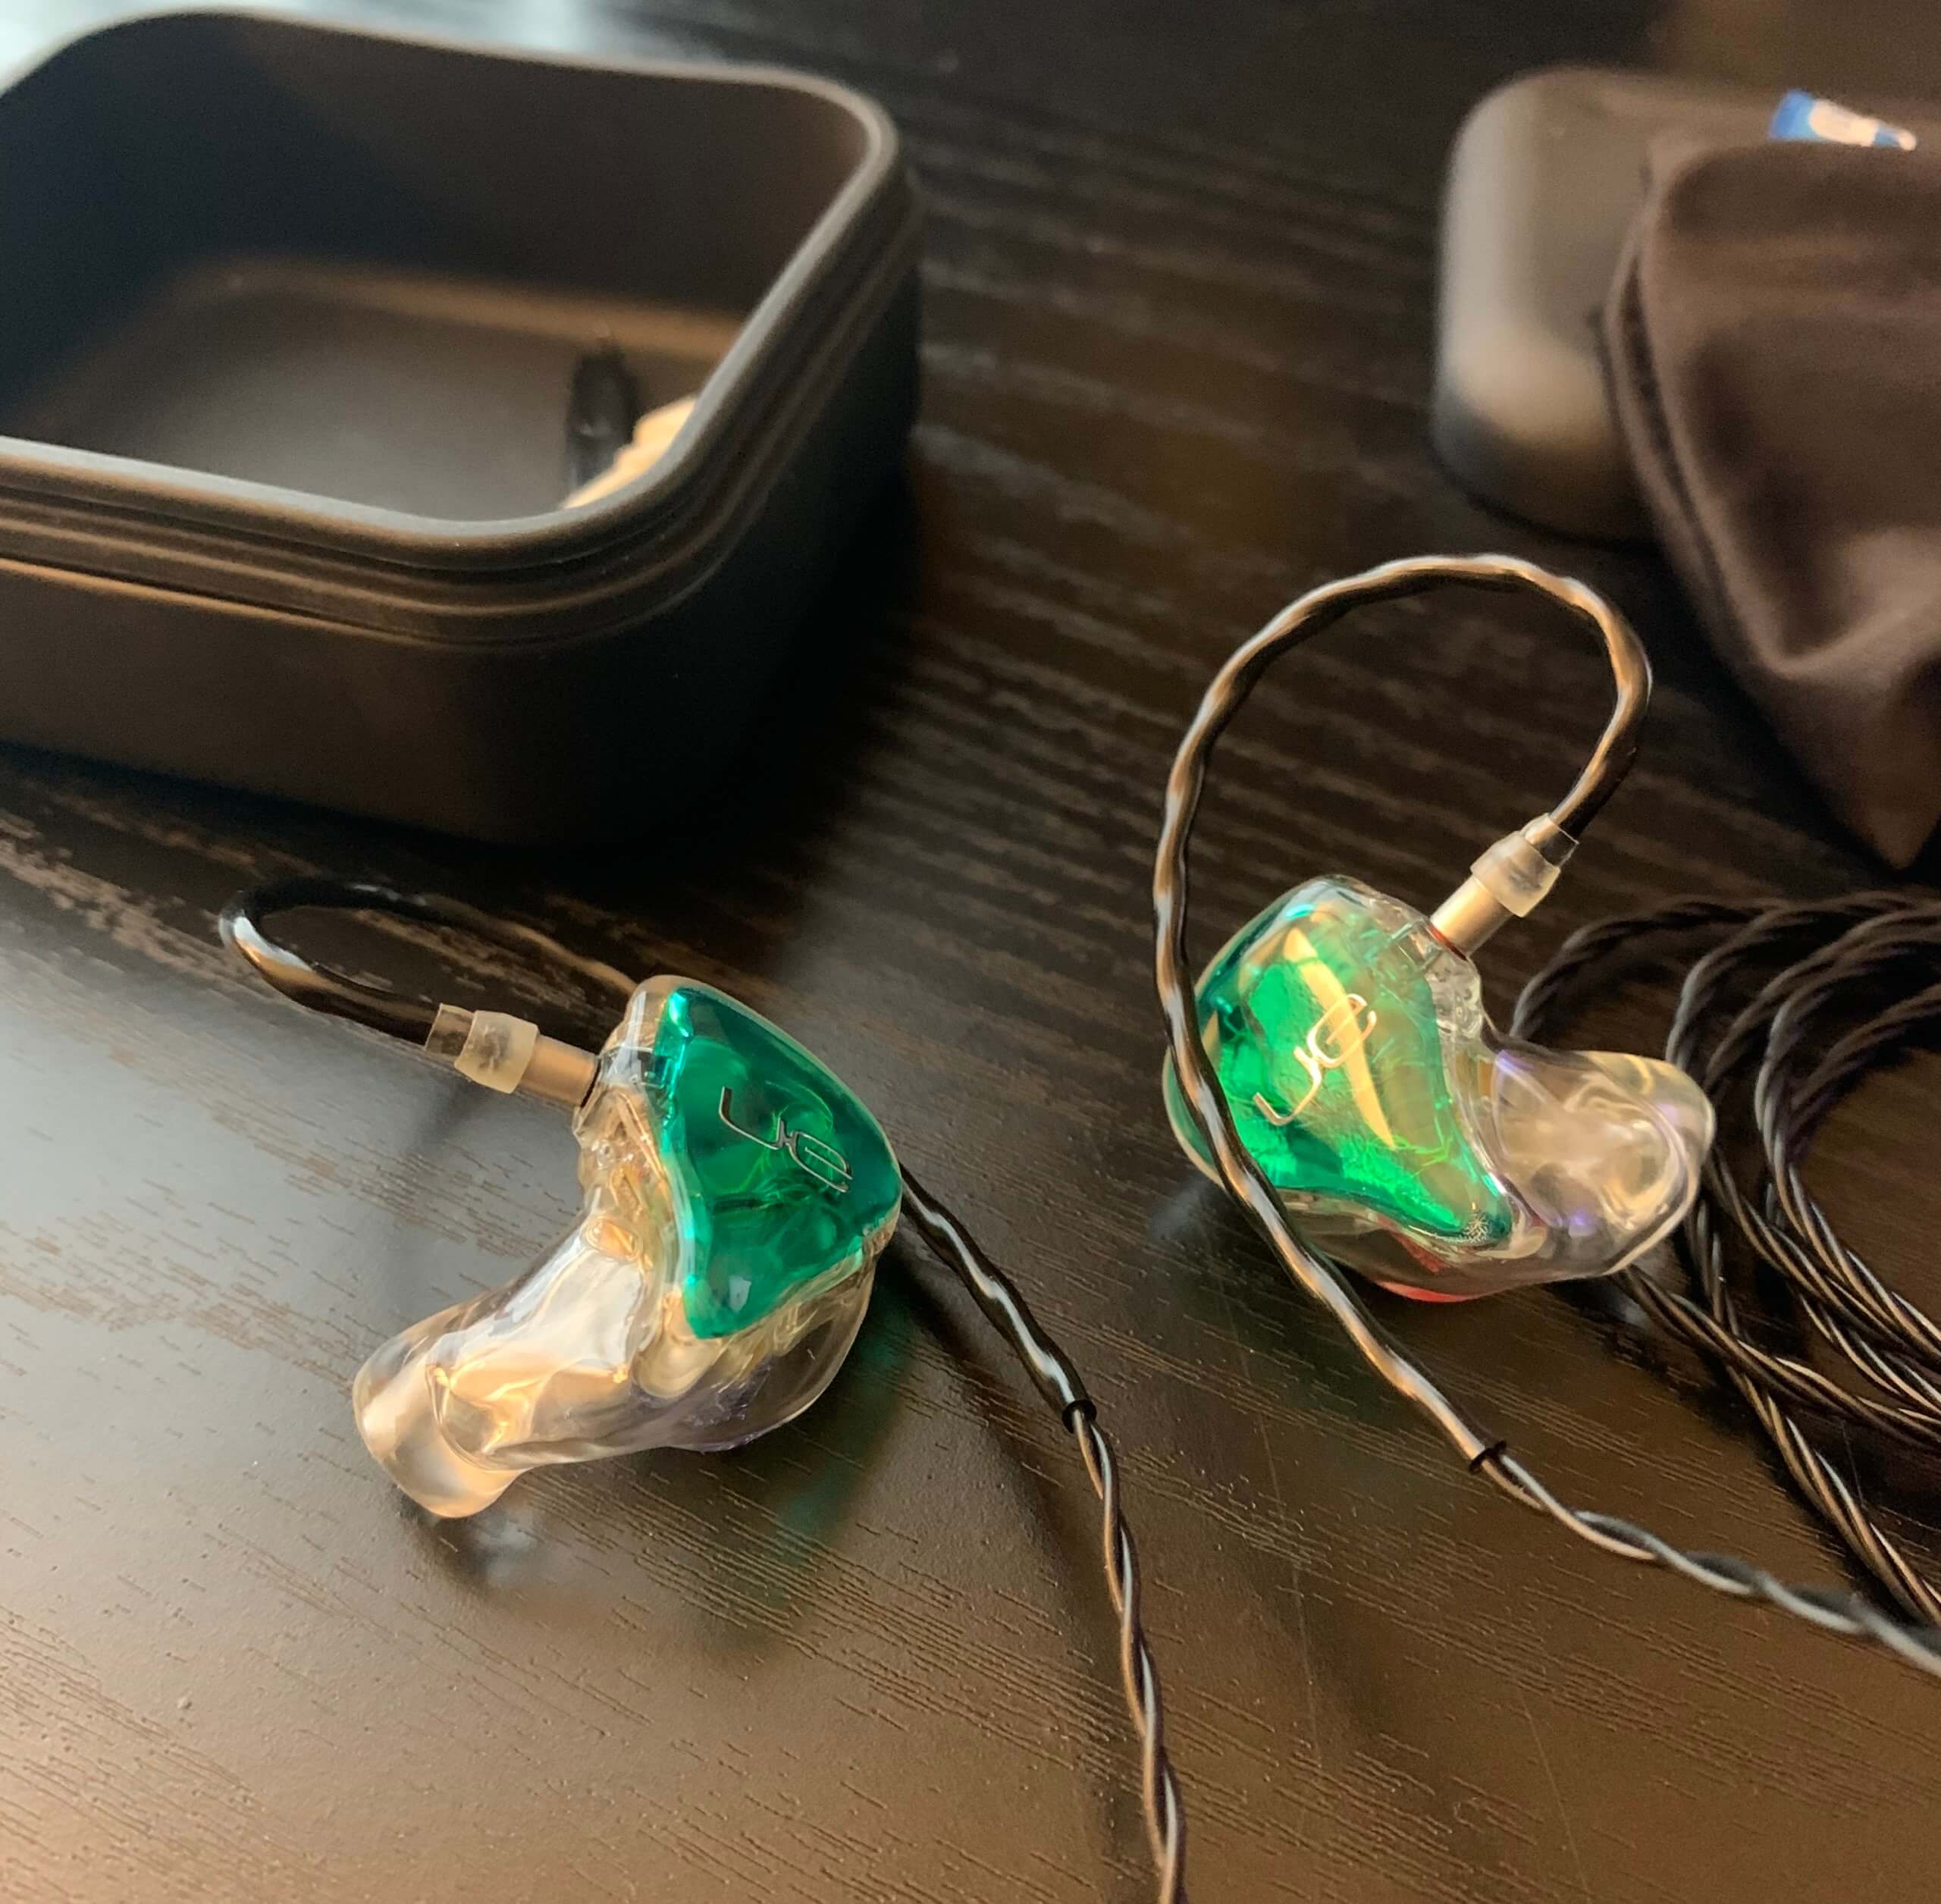 REVIEW: Ultimate Ears Pro LIVE in-ear stage monitors